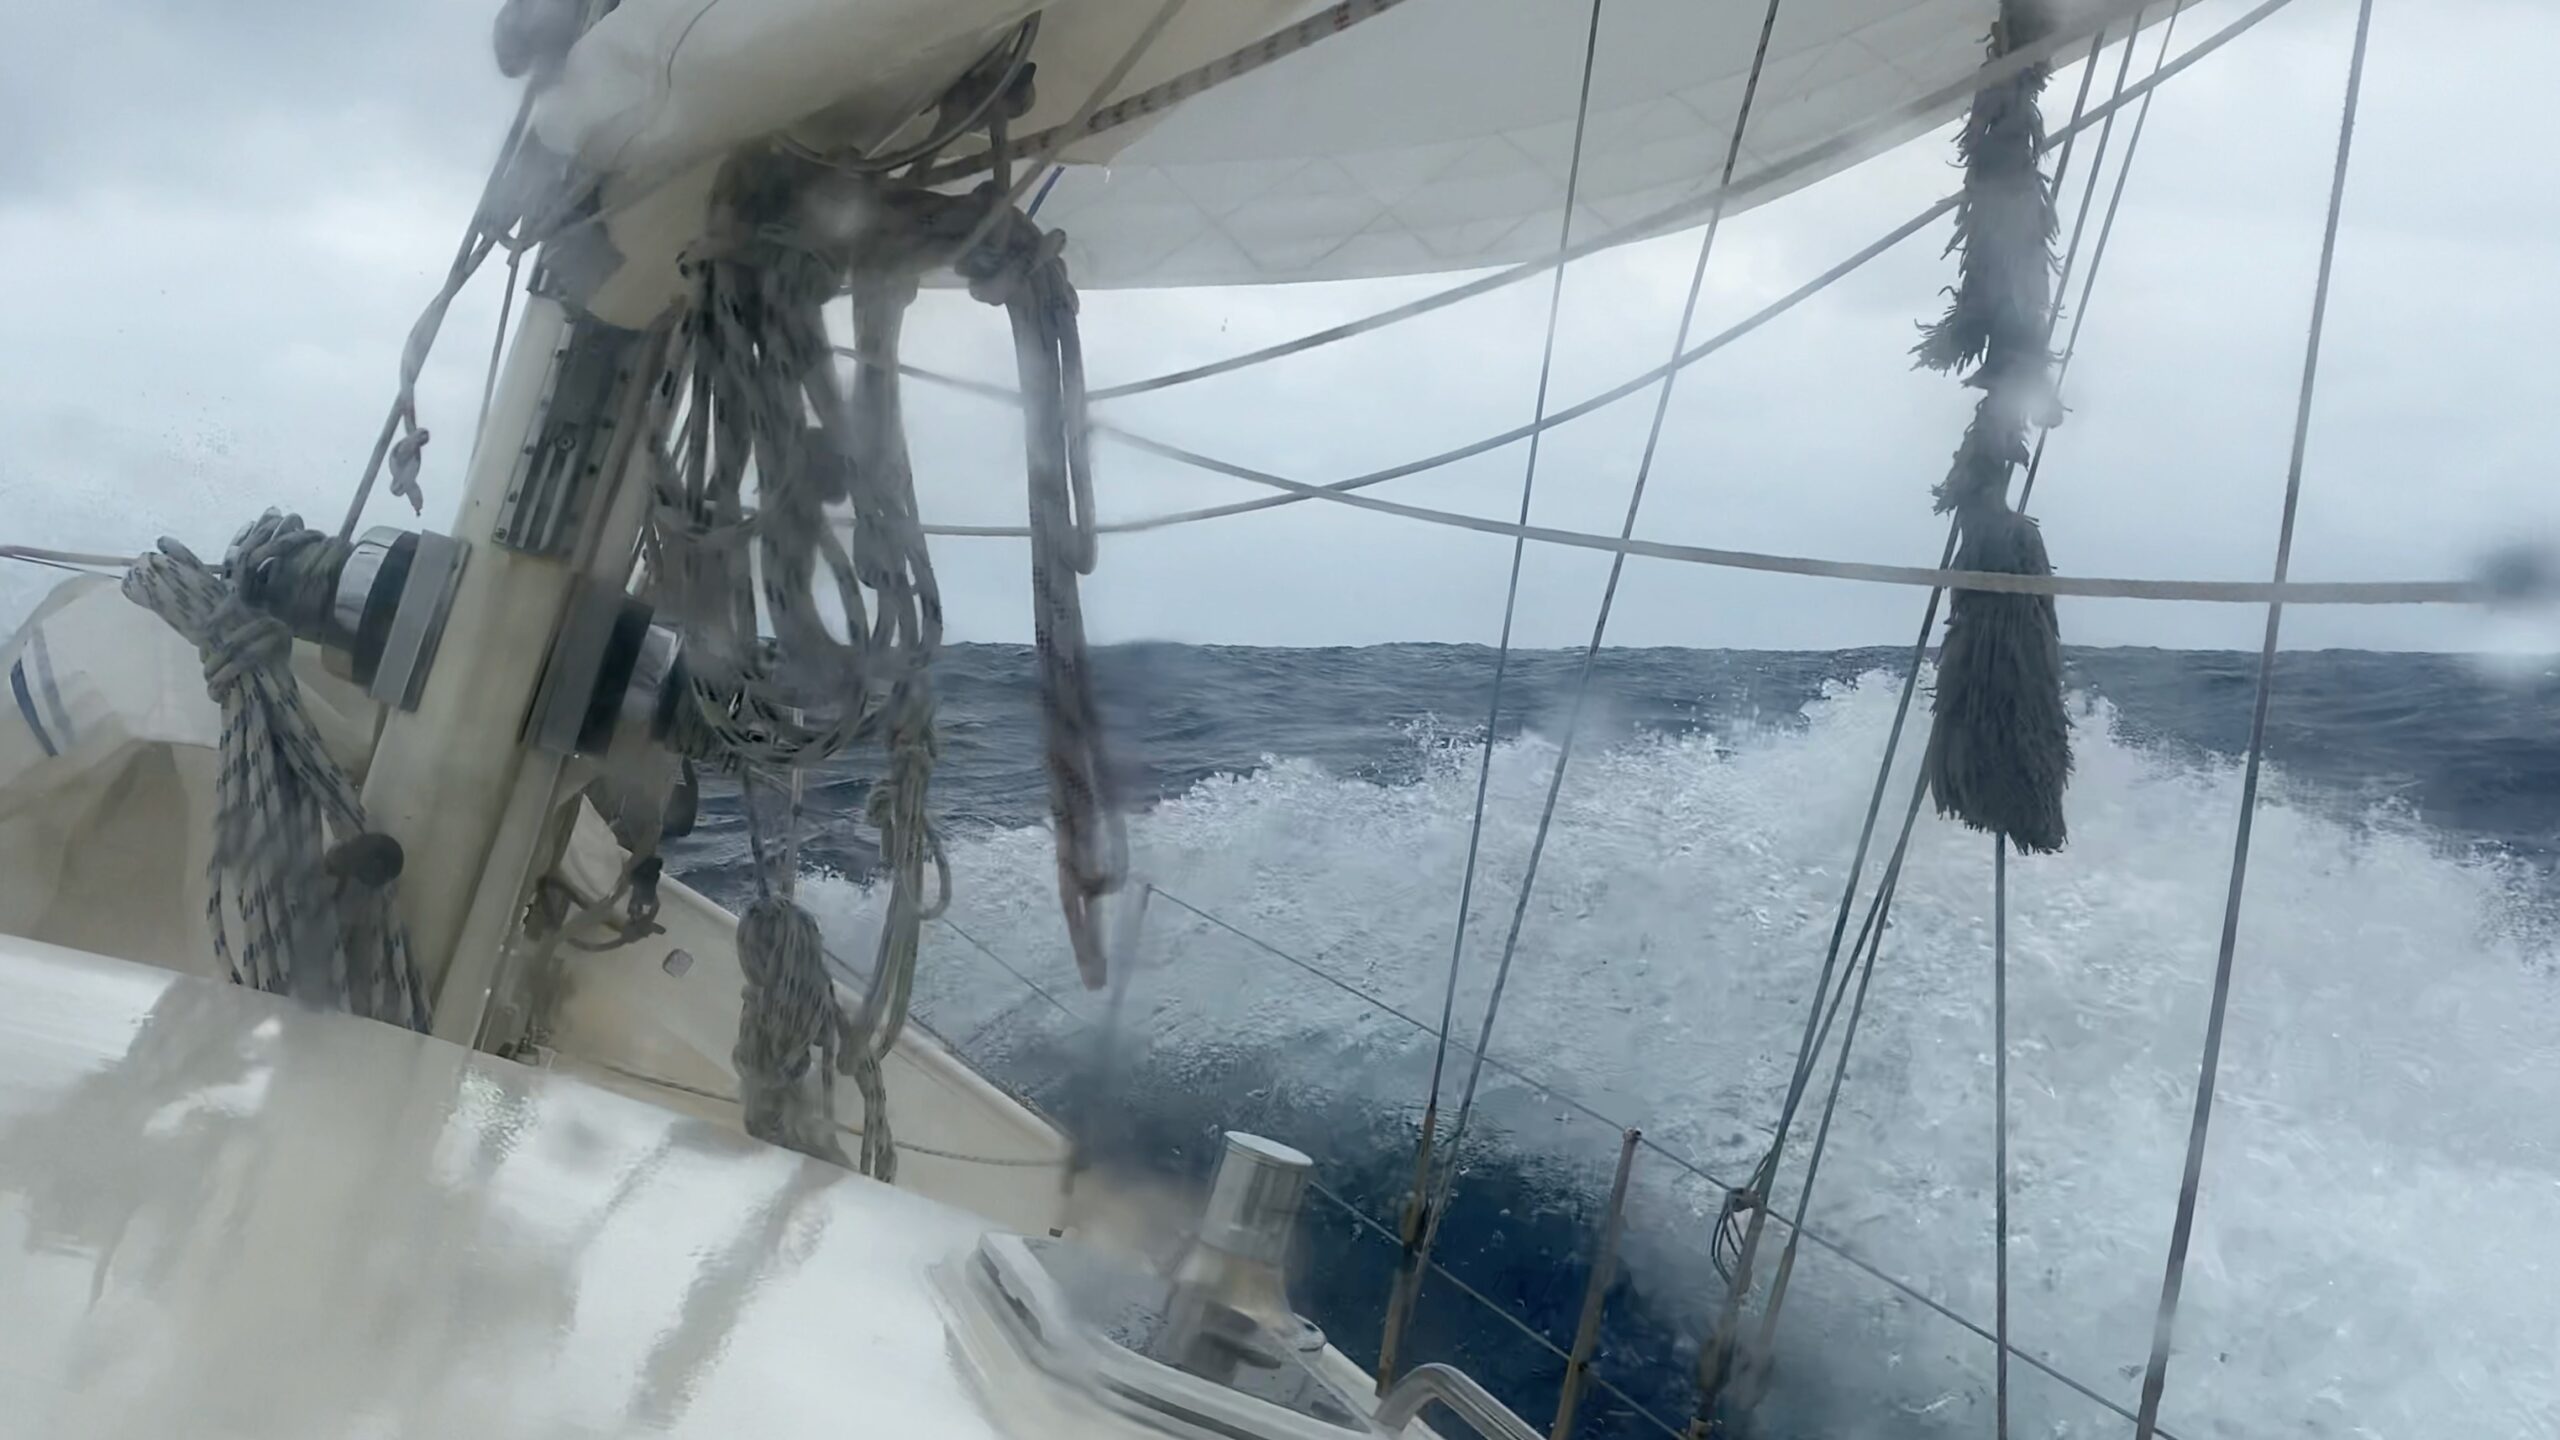 Crossing the Indian Ocean with cross swell and stormy weather